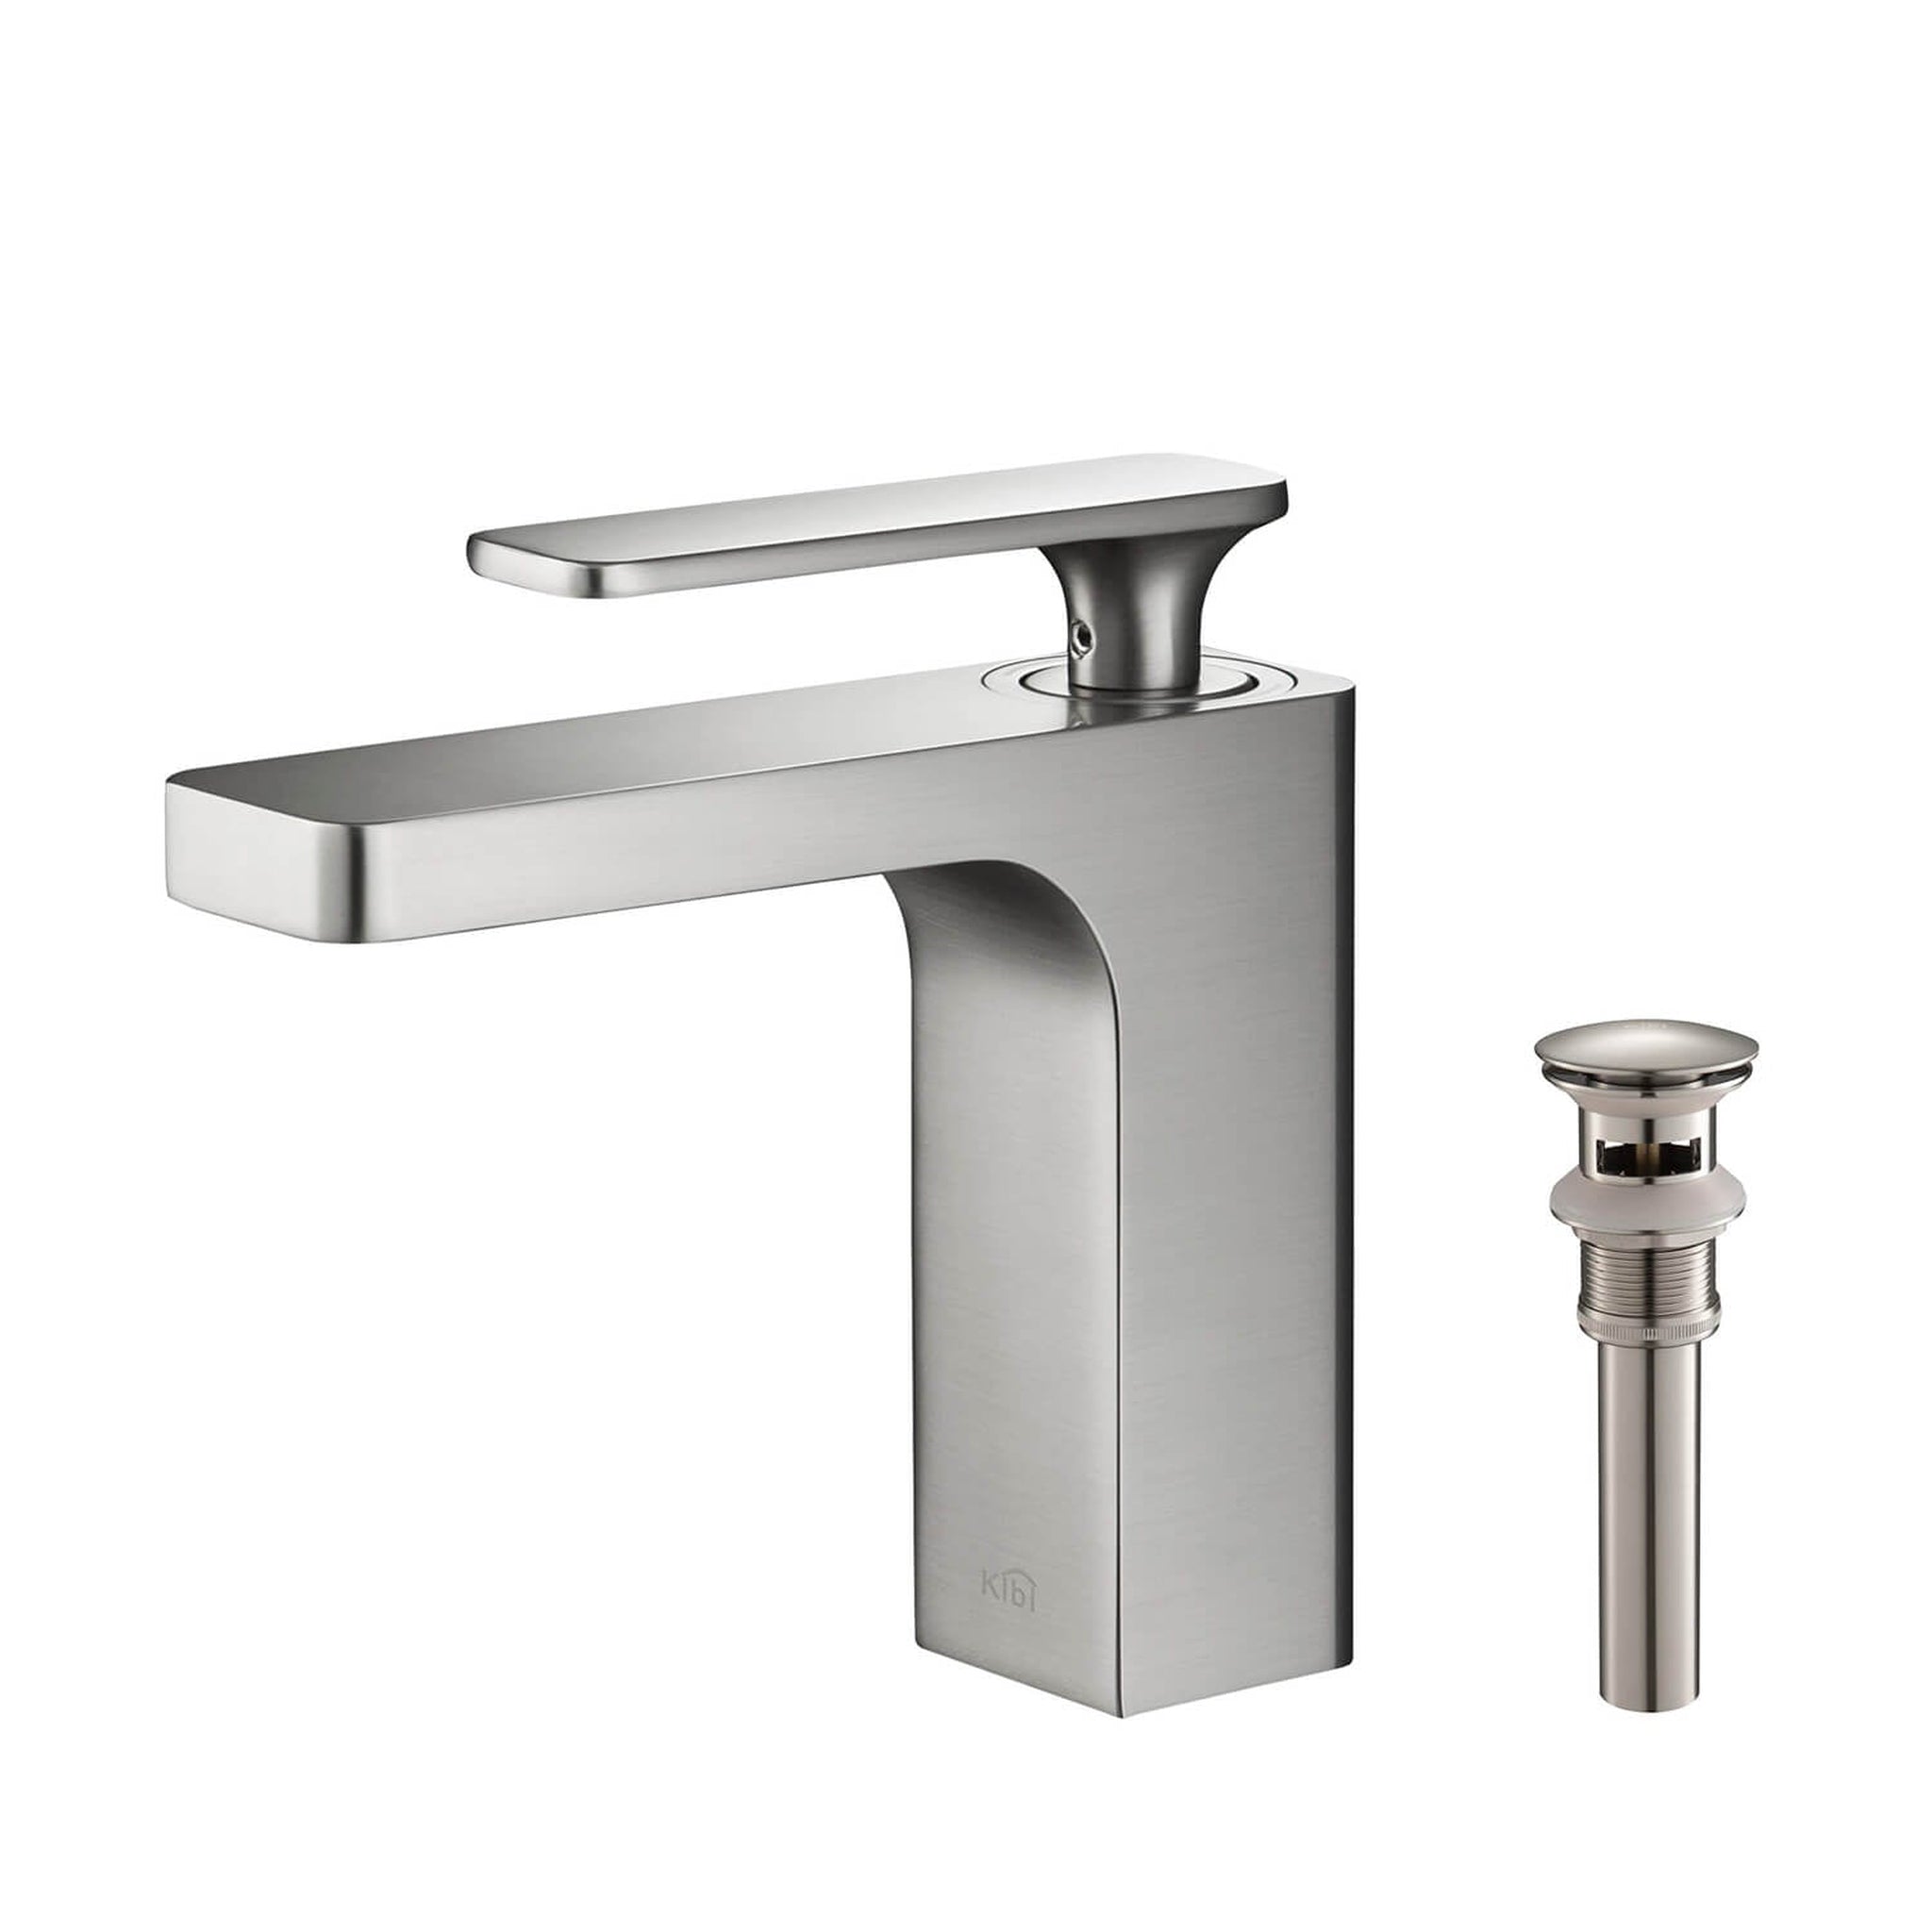 KIBI, KIBI Infinity Single Handle Brushed Nickel Solid Brass Bathroom Vanity Sink Faucet With Pop-Up Drain Stopper Small Cover With Overflow